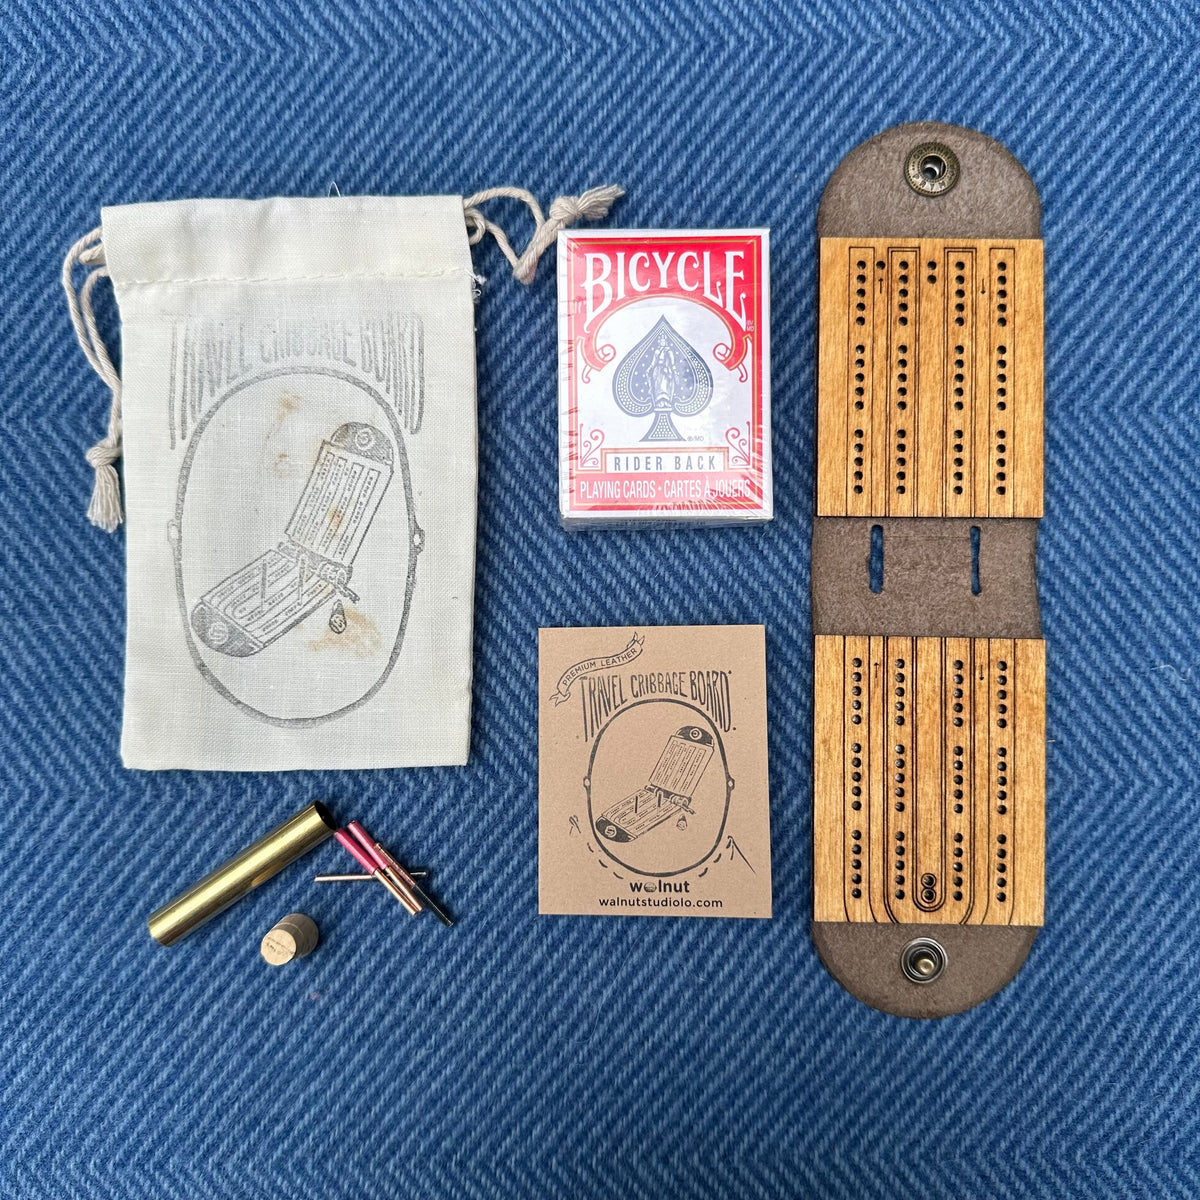 Walnut Studiolo AS-IS AS-IS SALE Original Travel Cribbage Board Peg Tube Cutouts Off-Center (Snap is Tight), New Wire Peg Tube, Factory-Stained Ultralight Gift Set with Light Imprint and Red Mini Deck (#005)